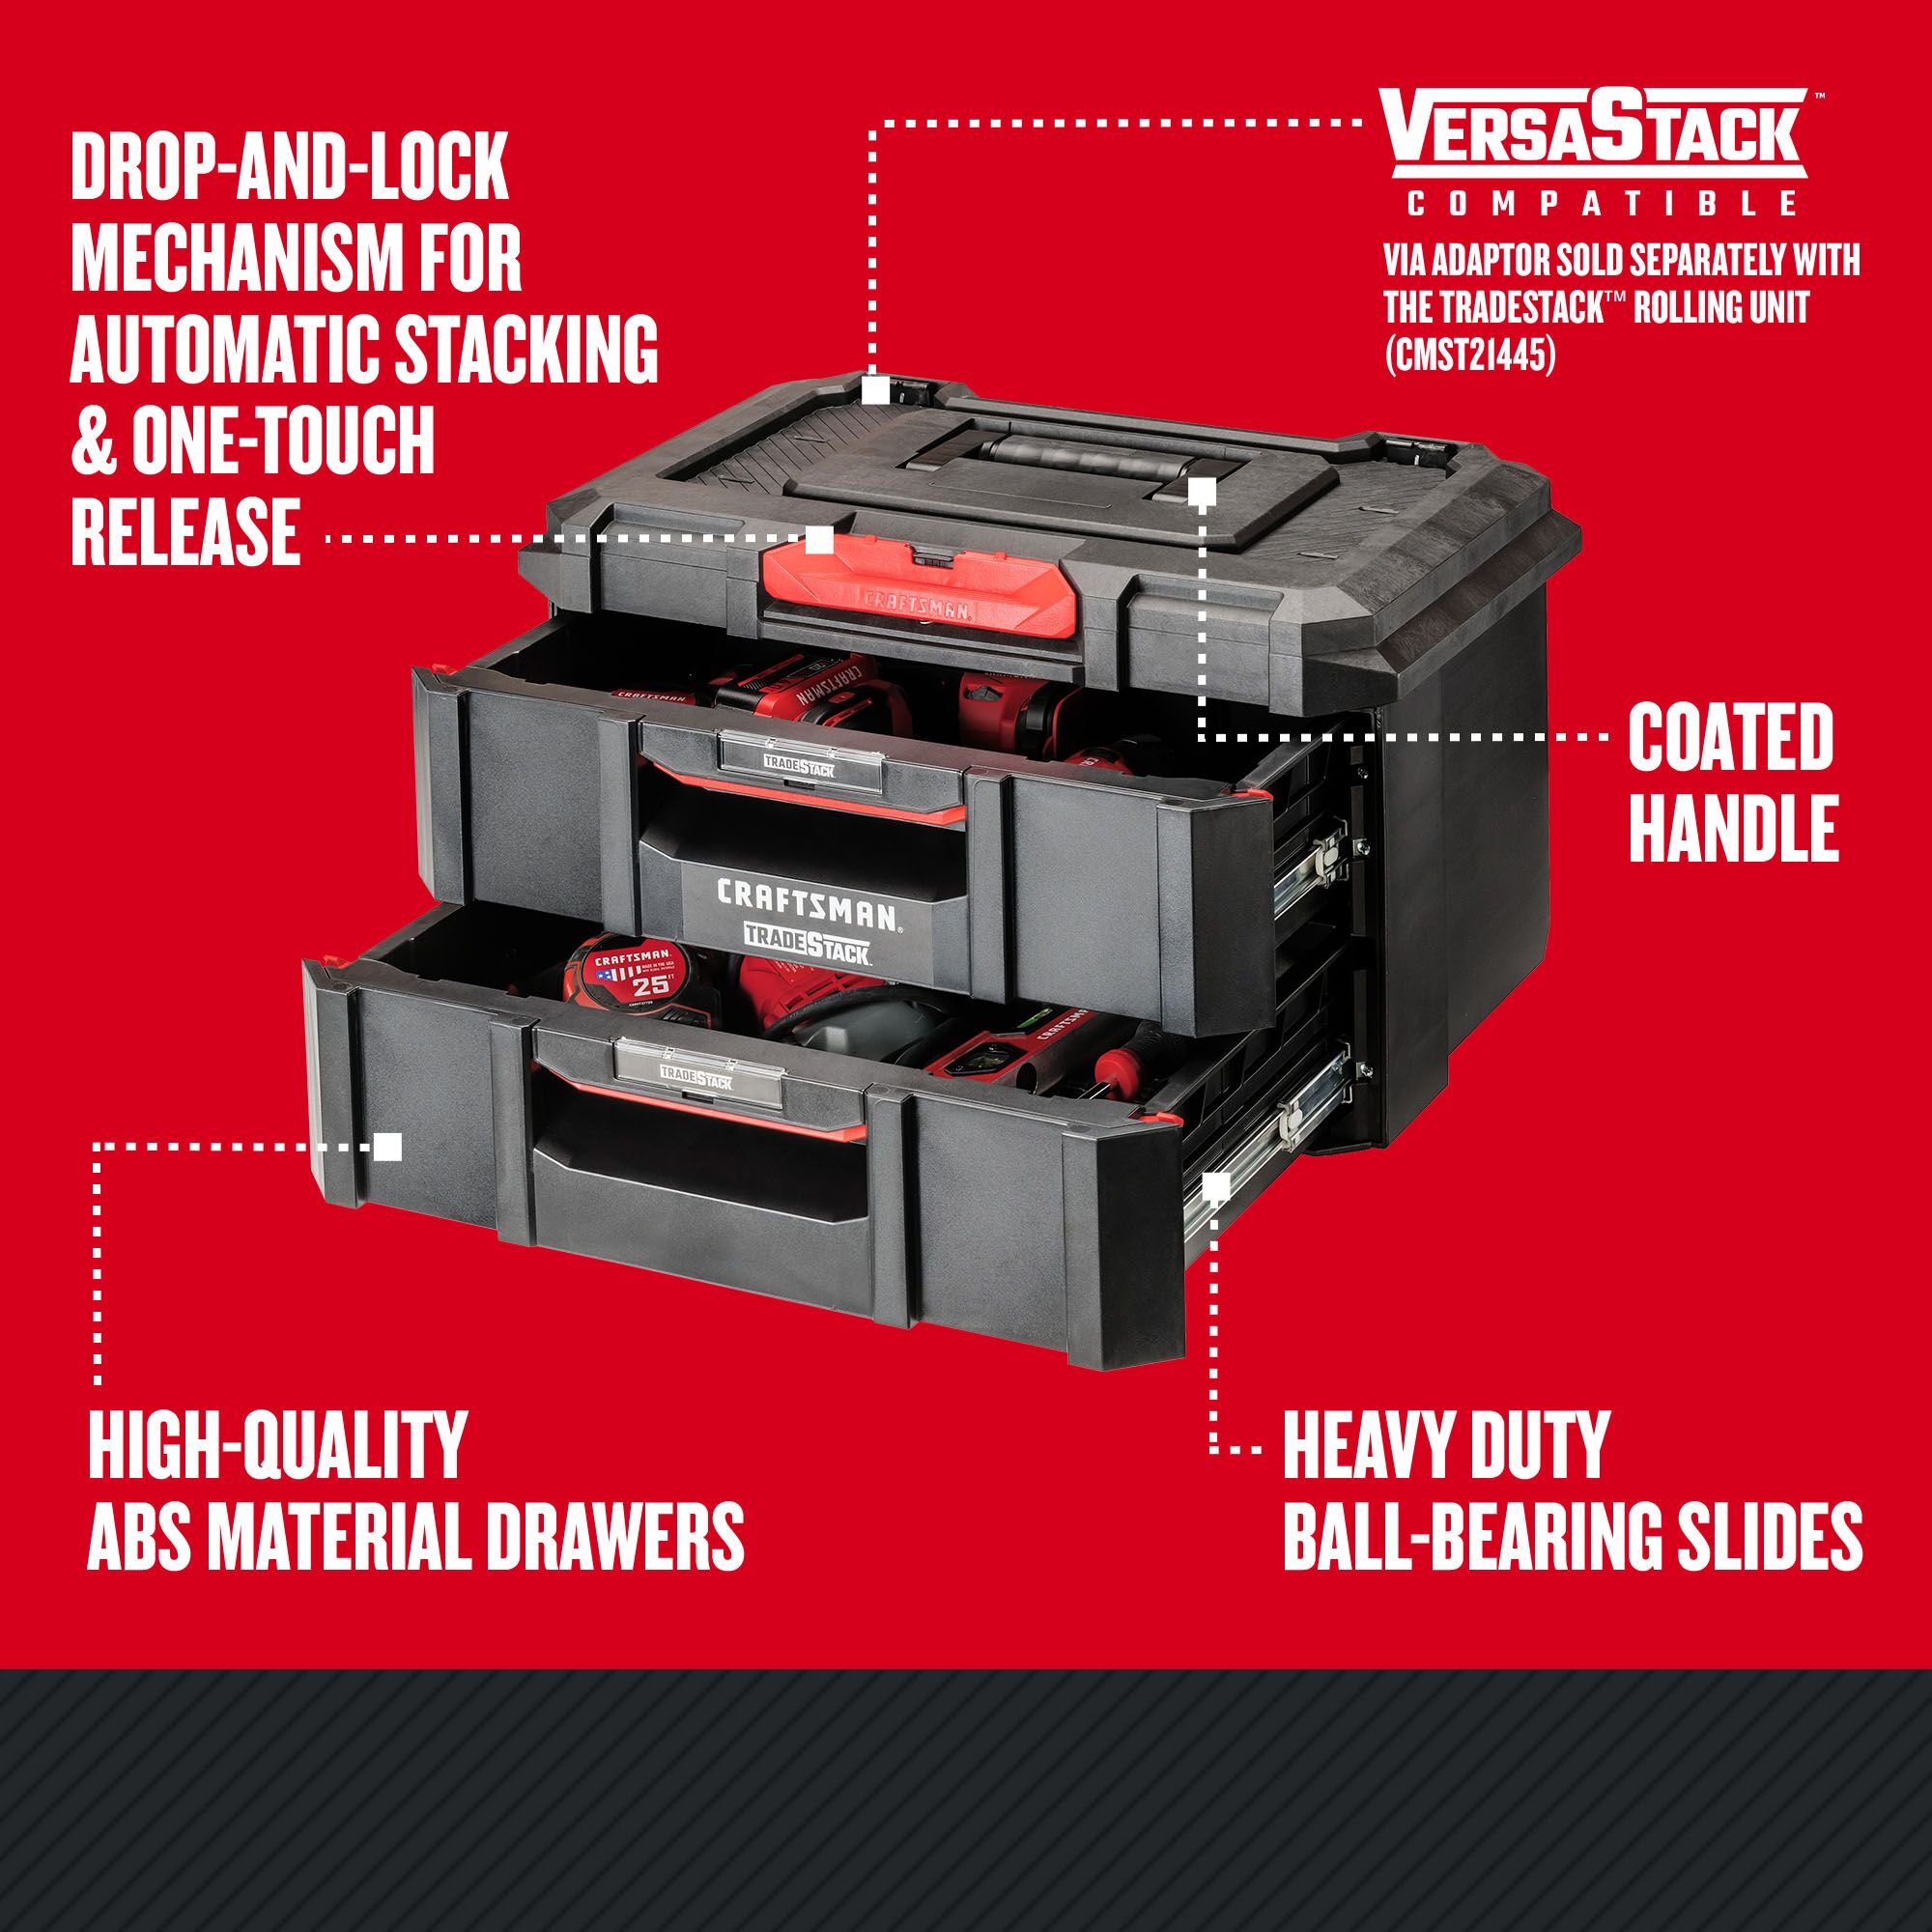 Drop-and-lock mechanism for automatic stacking & one-touch release; VERSASTACK System Compatible via adaptor sold separately with the TRADESTACK Rolling Unit (CMST21445); Coated Handle; Heavy Duty Ball-Bearing Slides; High-Quality ABS Material Drawers